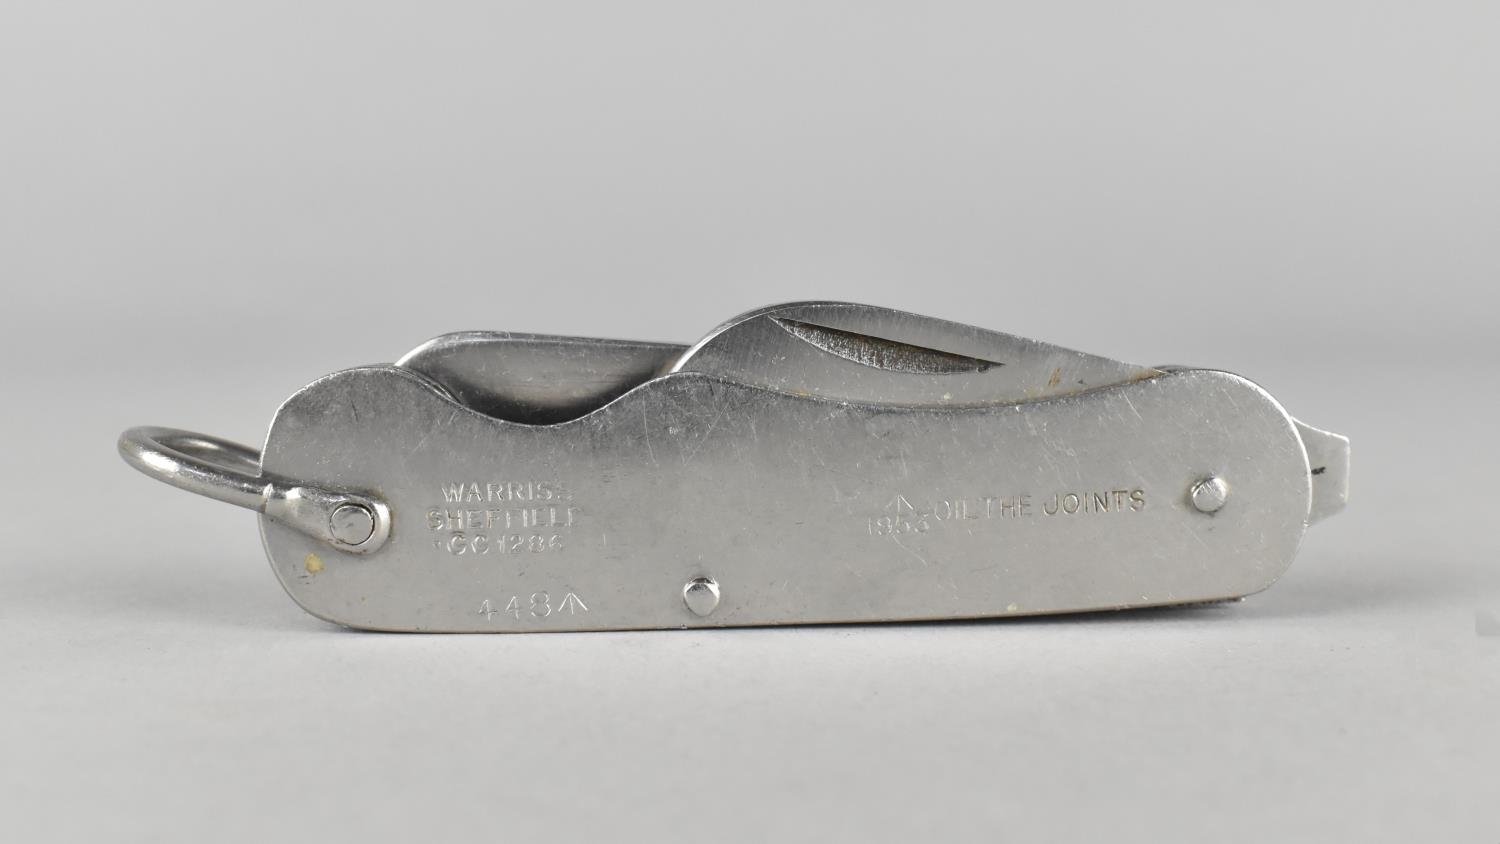 A British Military Issue Two Bladed Pocket Knife by Warriss of Sheffield with War Department Crows